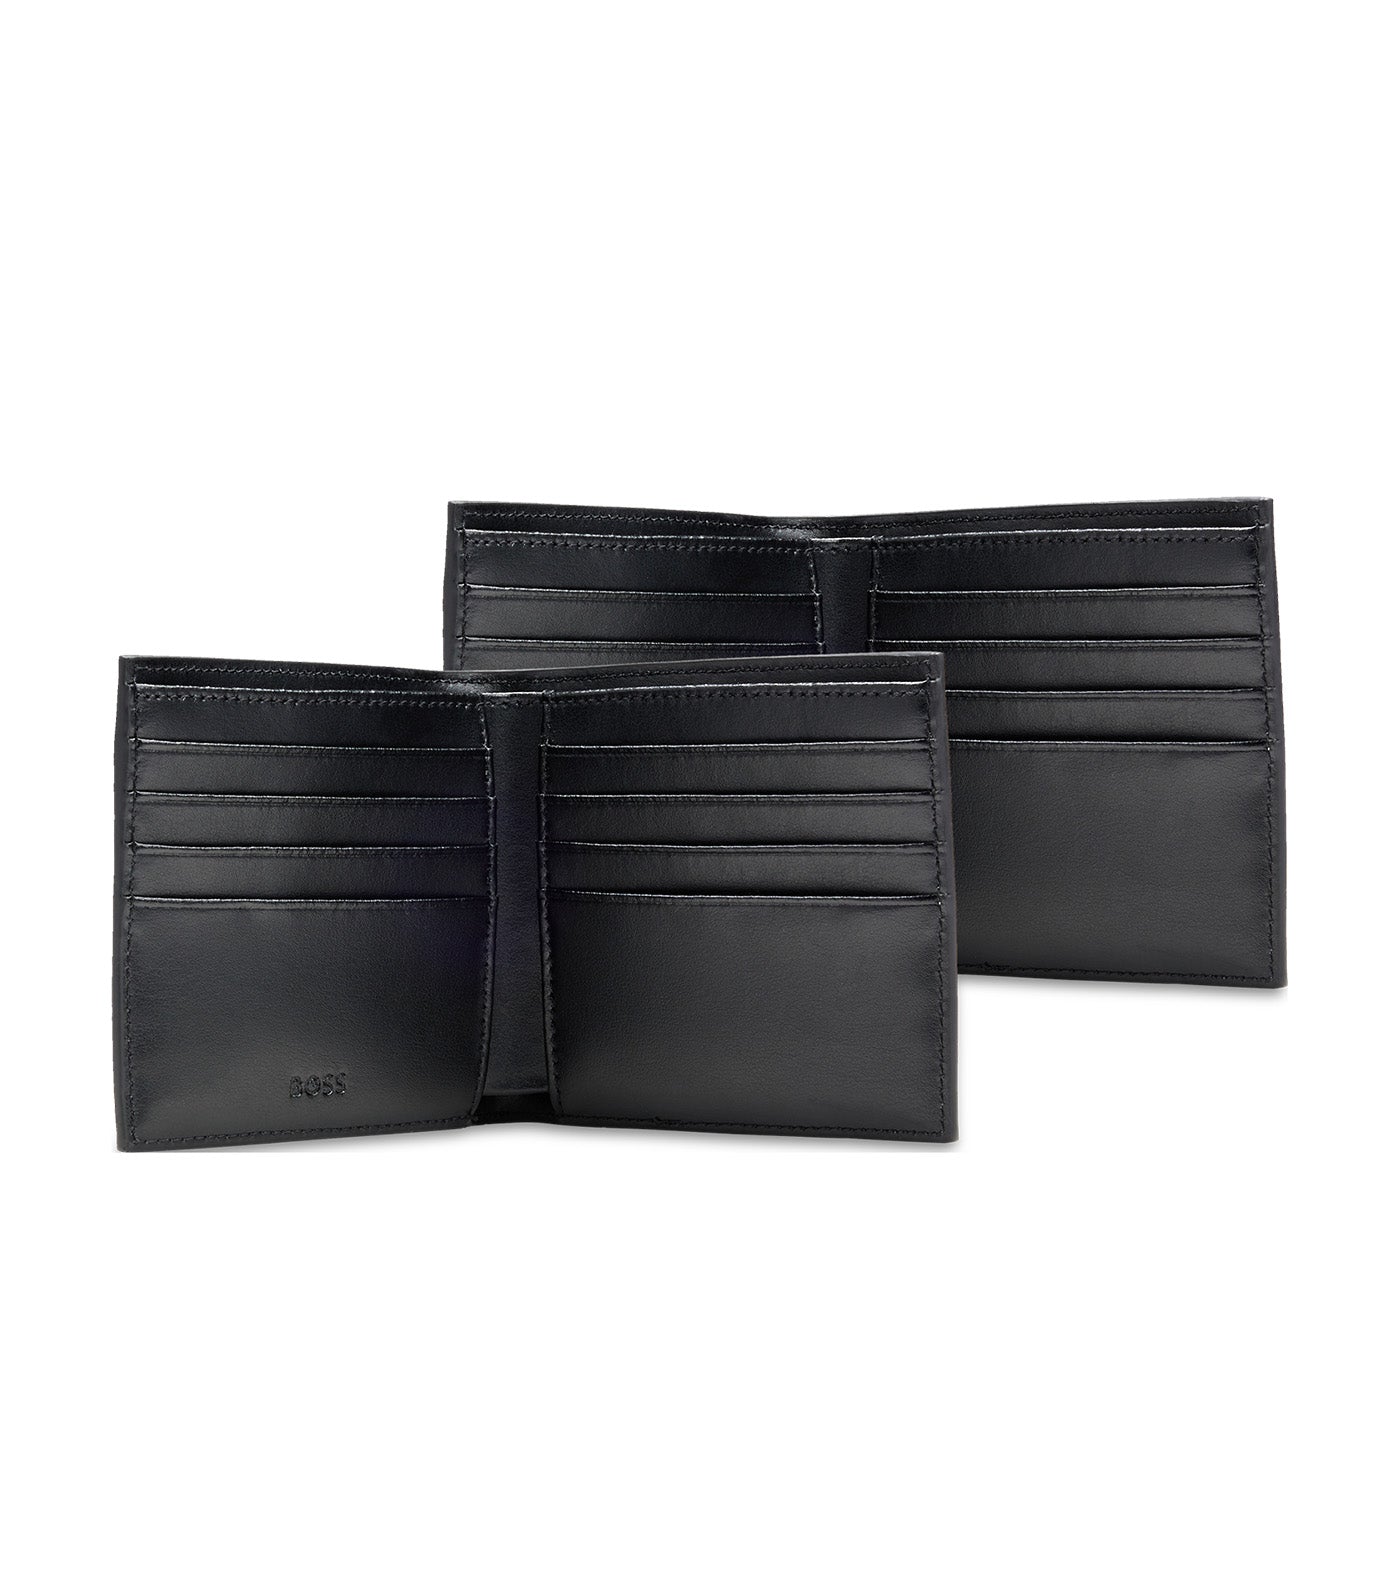 Monogram-Embossed Leather Card Case and Wallet Gift Set